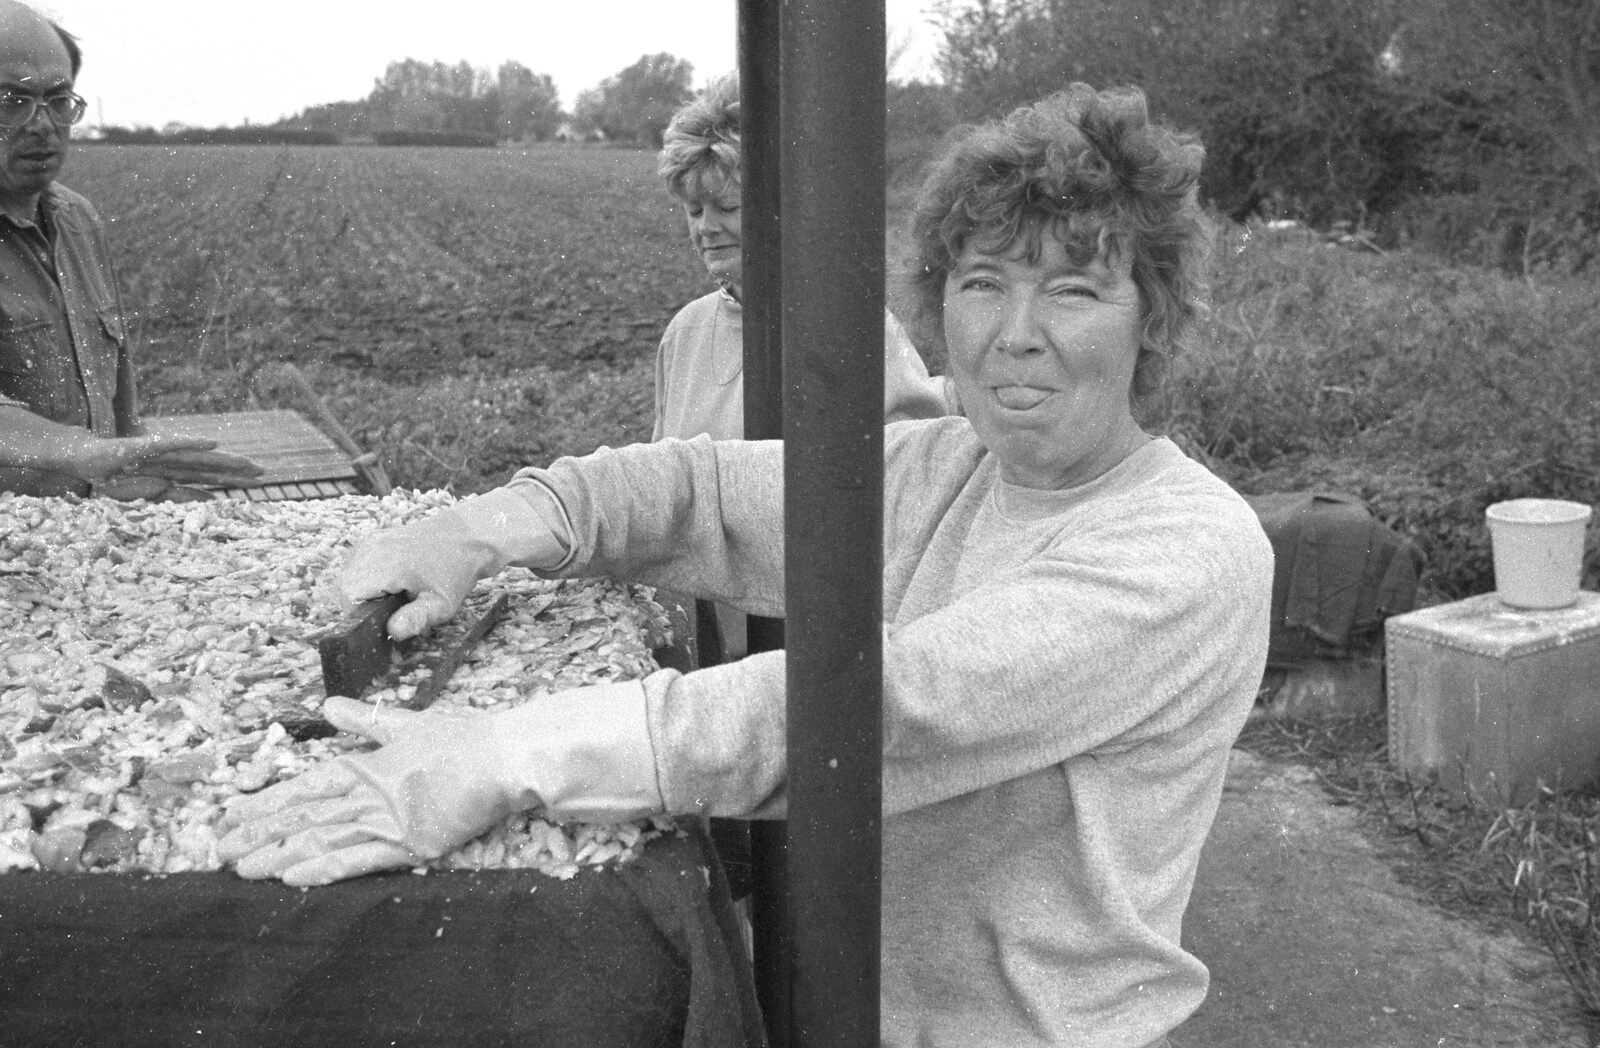 Brenda sticks her tongue out from Cider Making in Black and White, Stuston, Suffolk - 11th October 1992